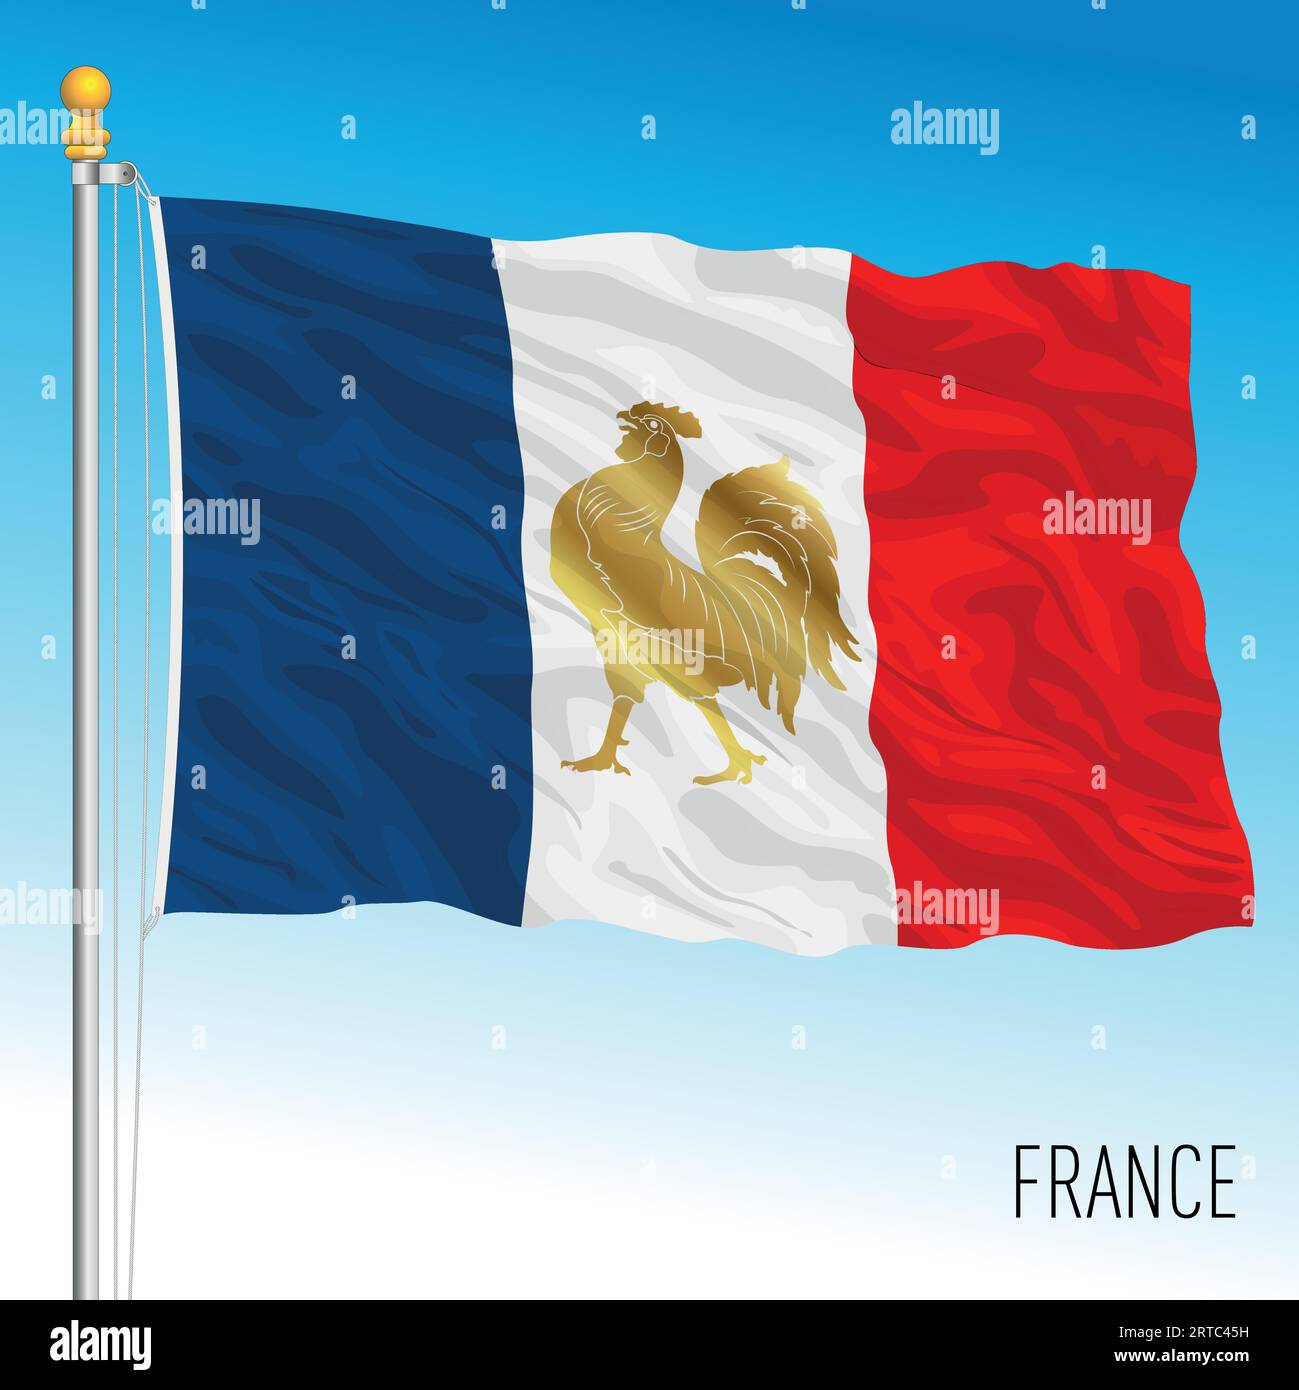 France waving flag with historical french symbol, vector illustration Stock Vector